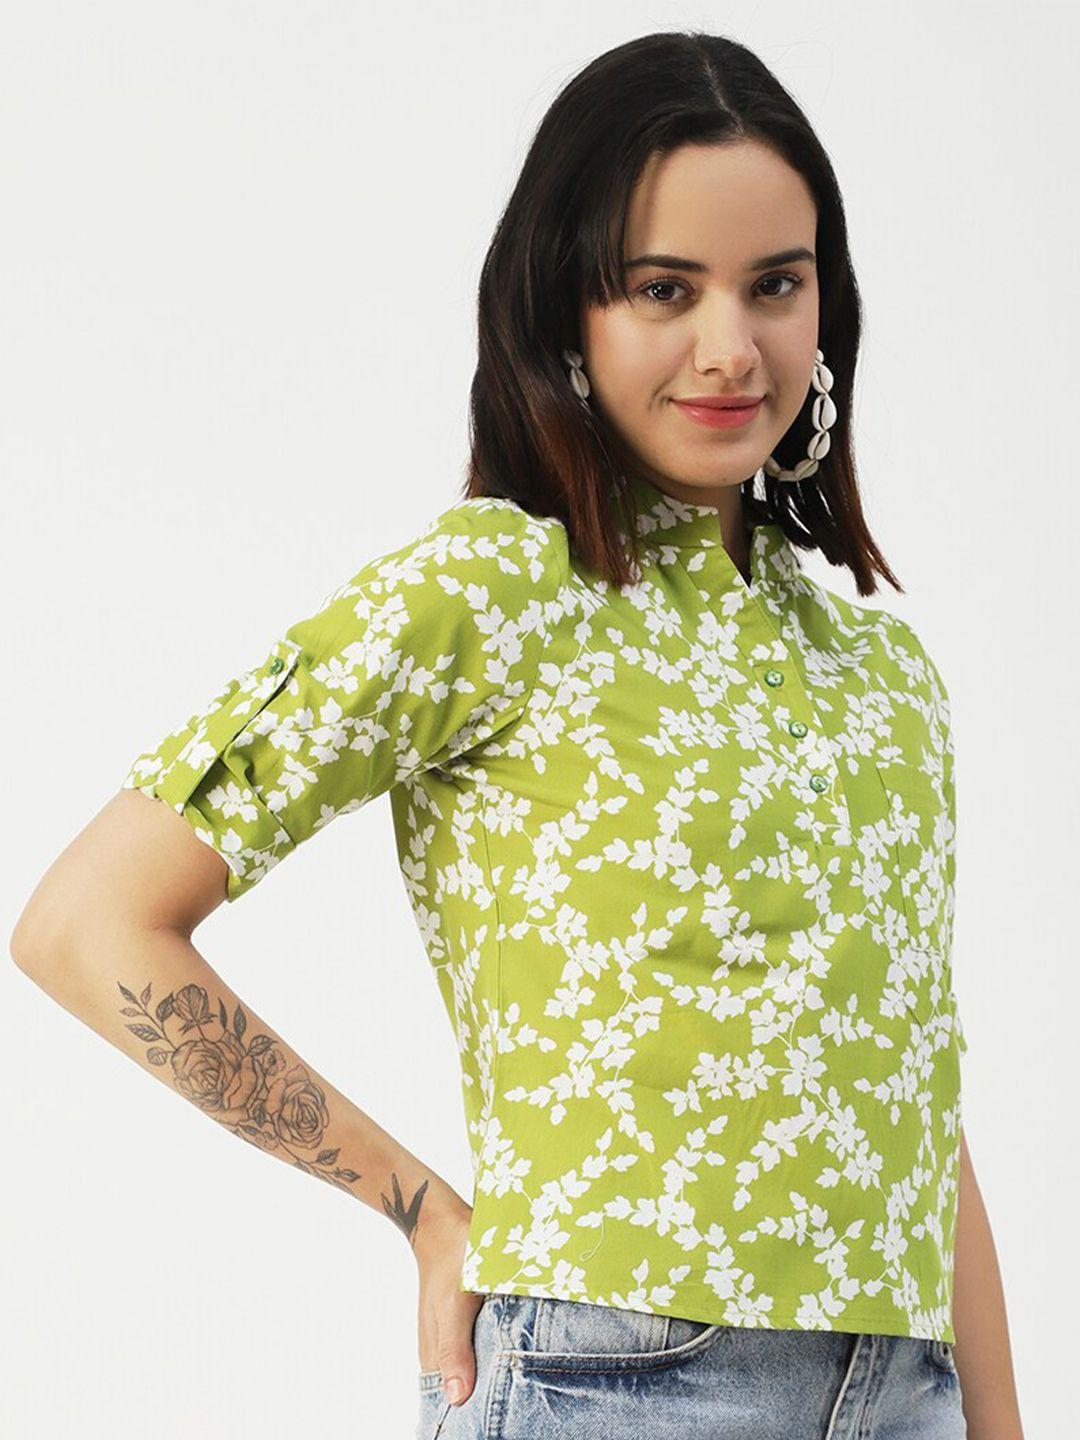 moomaya-green-floral-print-roll-up-sleeves-cotton-shirt-style-top